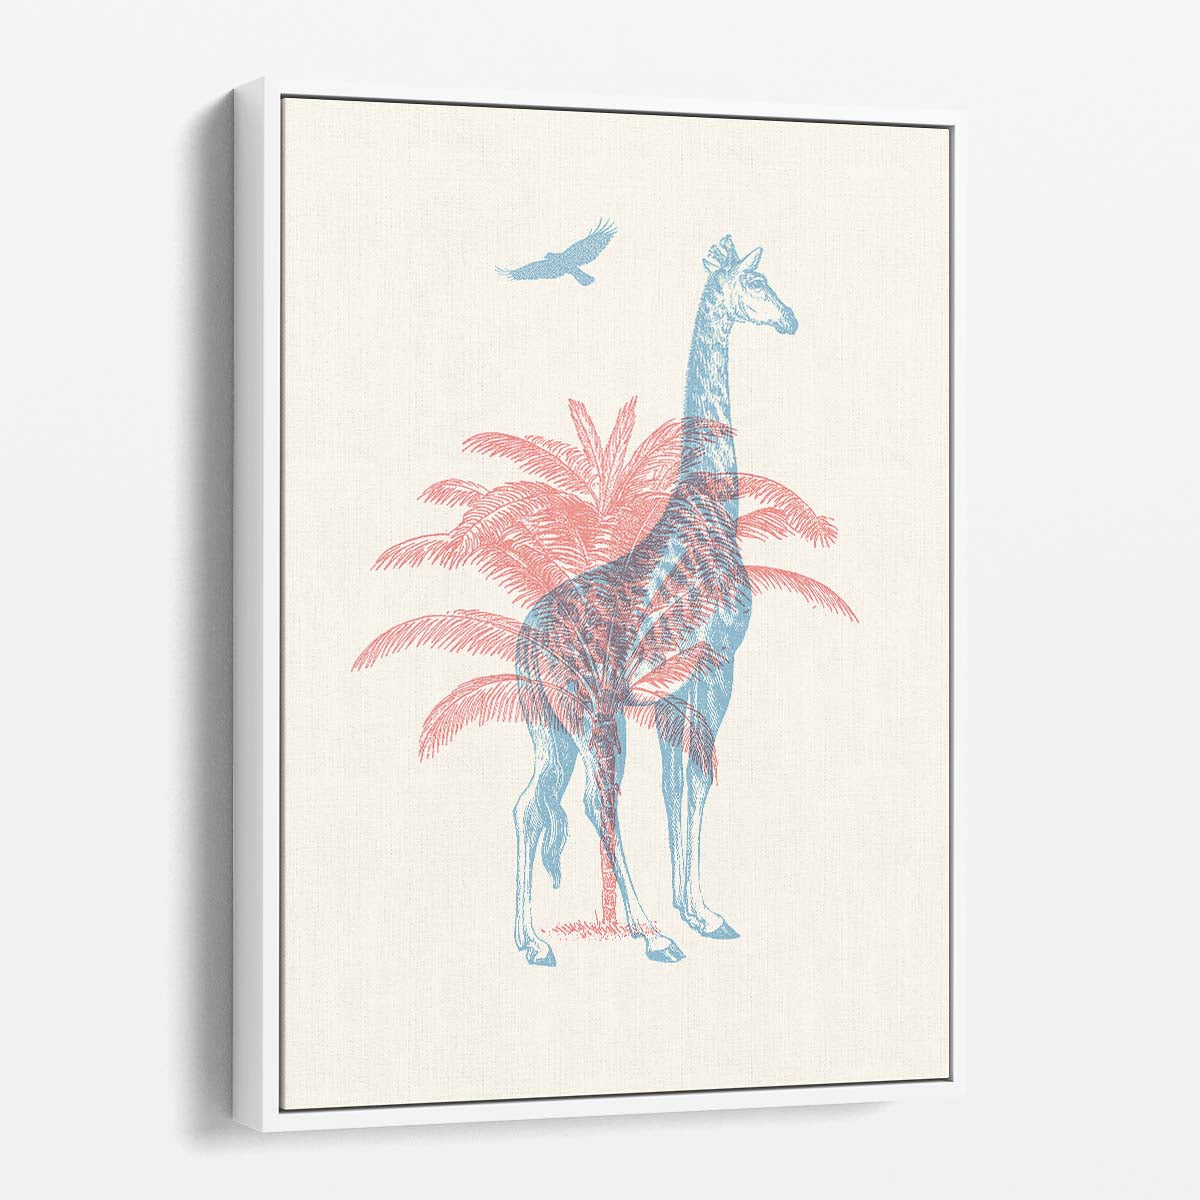 Tropical Giraffe Illustration Art with Palm Trees, Exotic Birds by Luxuriance Designs, made in USA